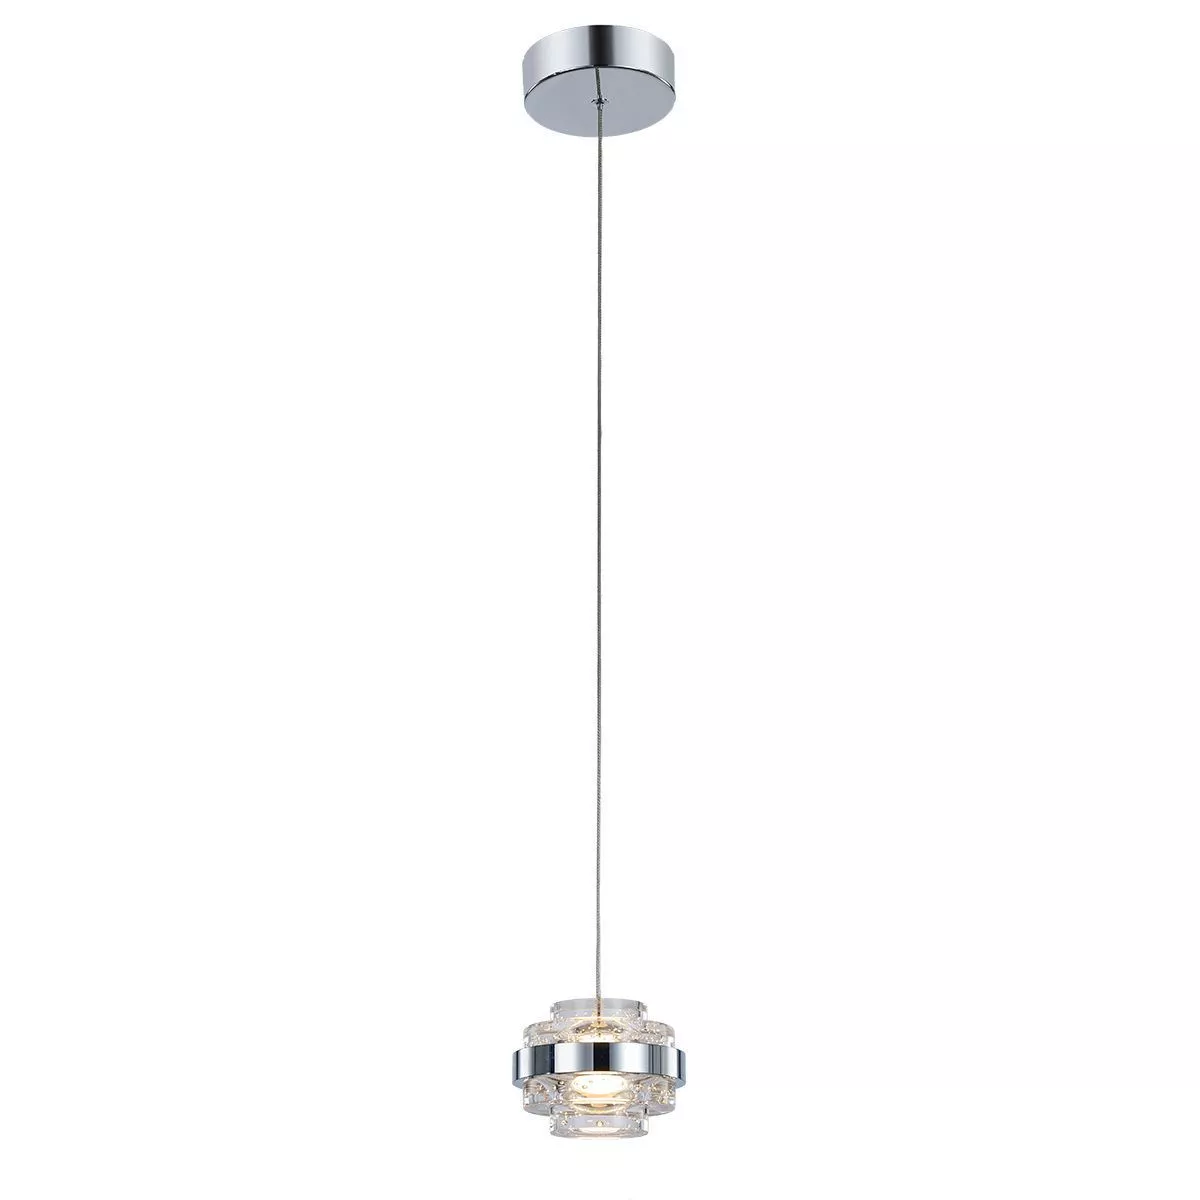 Подвесной светильник Delight Collection MD22030002 MD22030002-1A chrome/clear